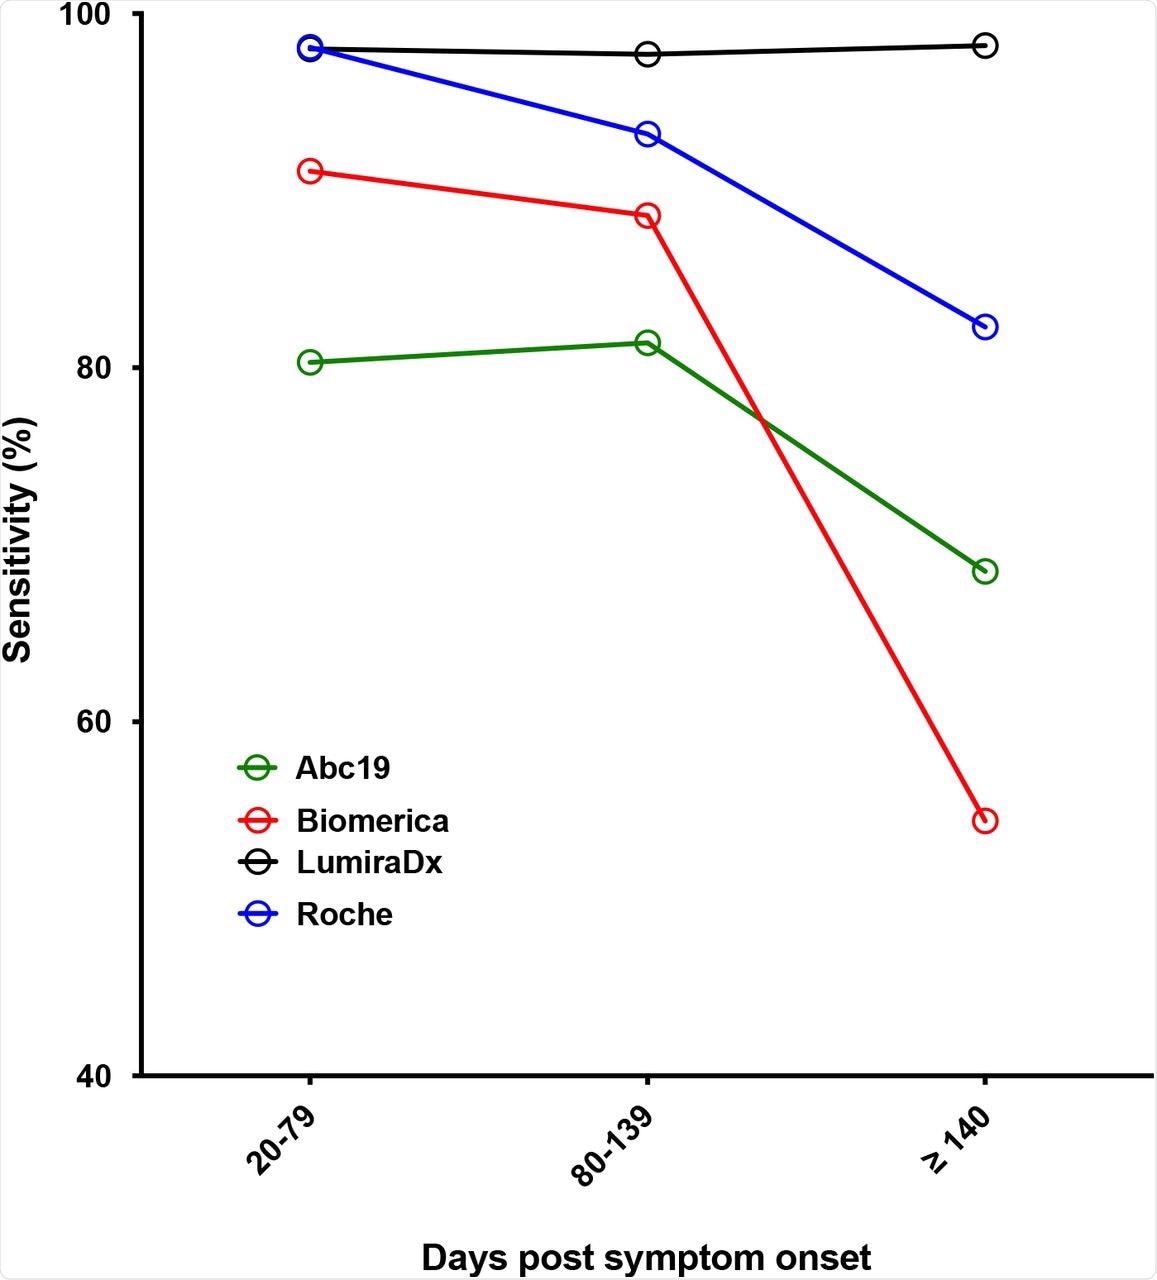 Sensitivity against time post symptom onset for selected kits (IgG for all LFA, with the exception of LumiraDX, where overall antibody result was used).